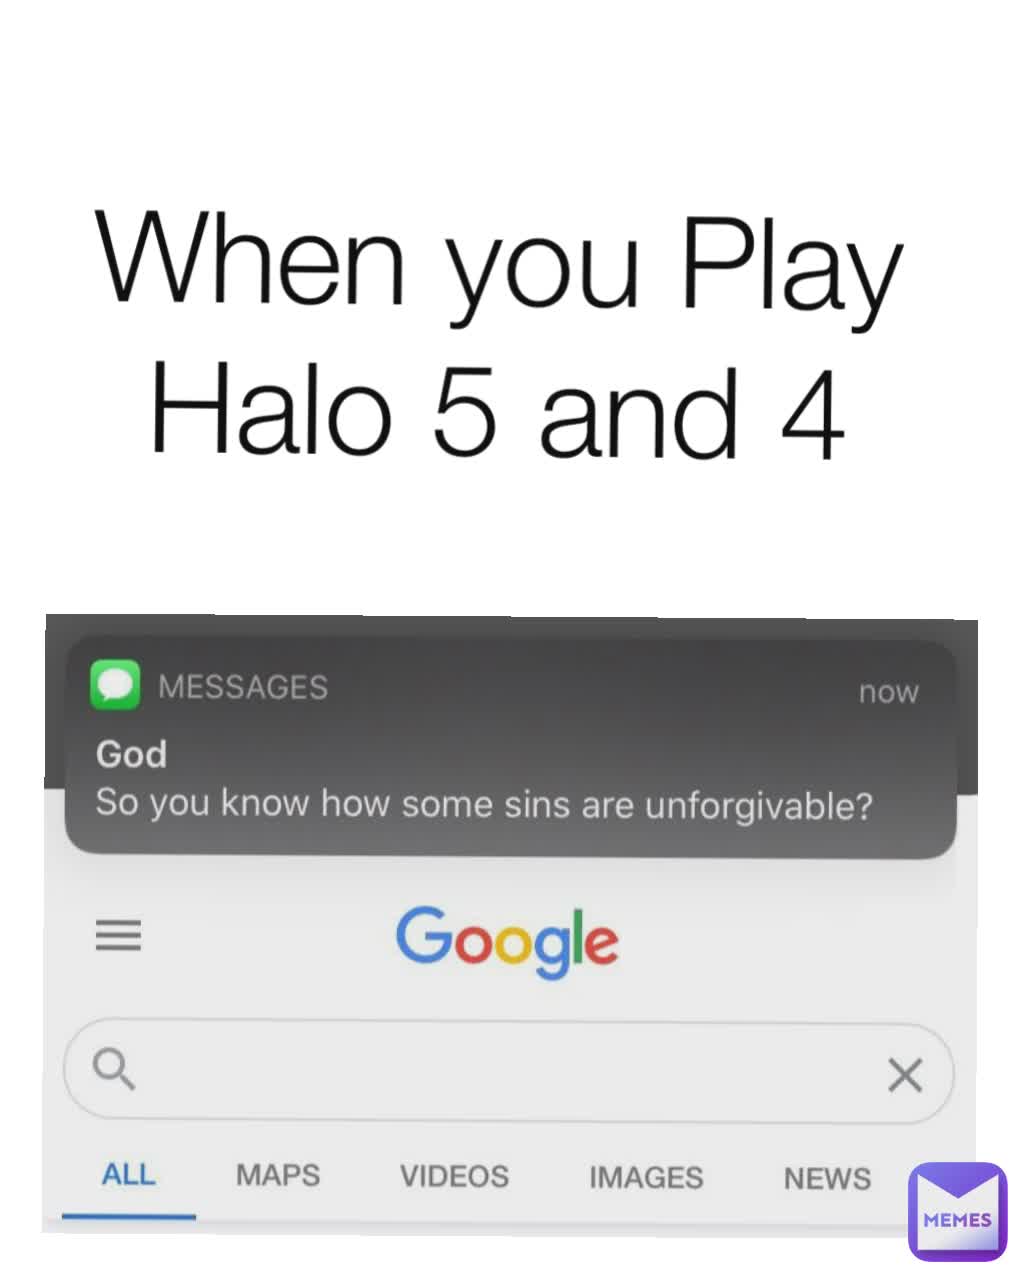 When you Play Halo 5 and 4